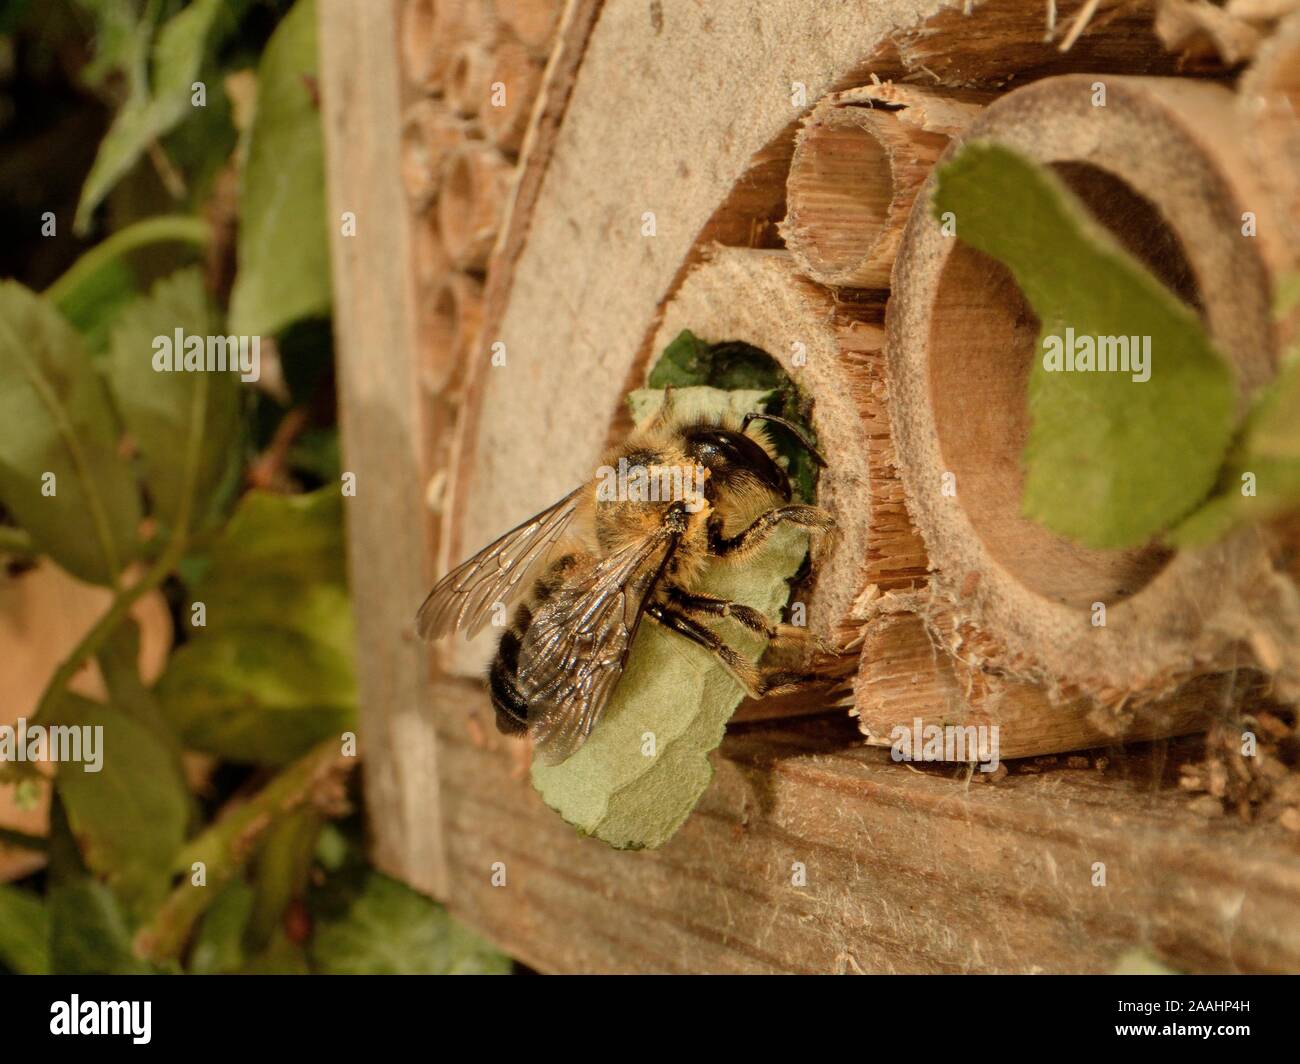 Leaf-cutter / Rose-cutter bee (Megachile willughbiella) carrying a circular section of Rose leaf to its nest in a Bamboo tube in an insect hotel, UK. Stock Photo